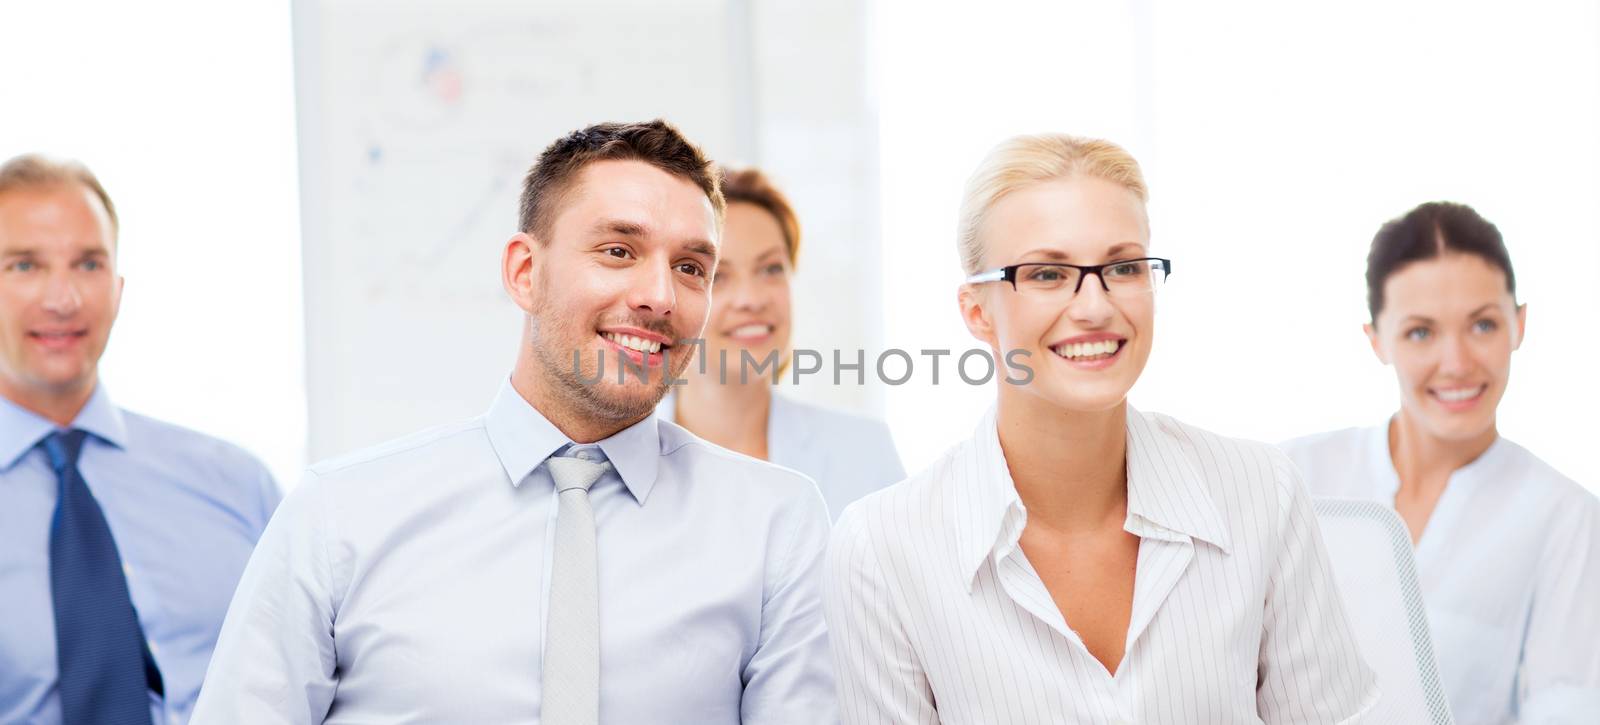 picture of smiling businessmen and businesswomen on conference